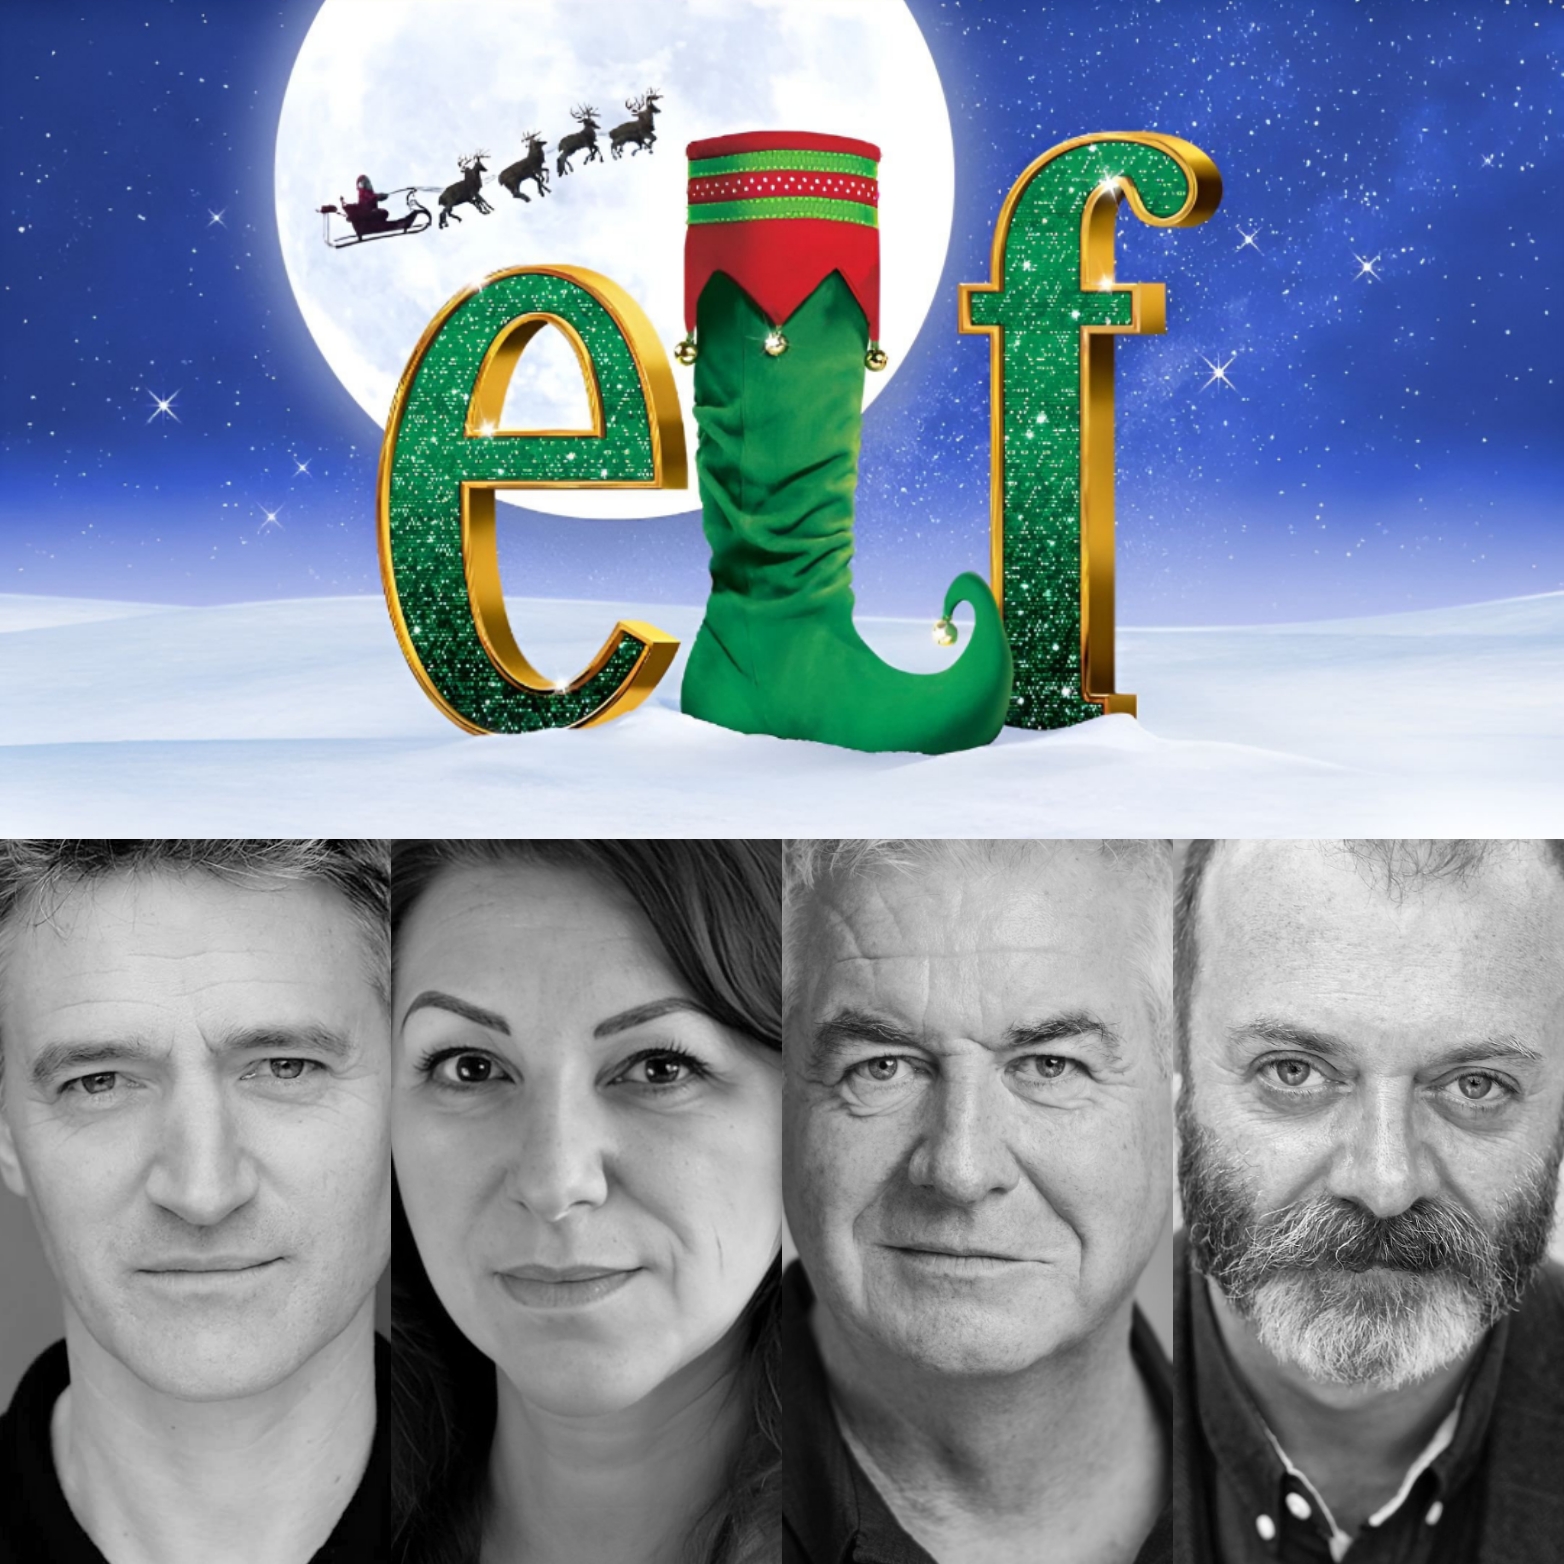 Tom Chambers joins the cast of Elf The Musical at the Dominion Theatre